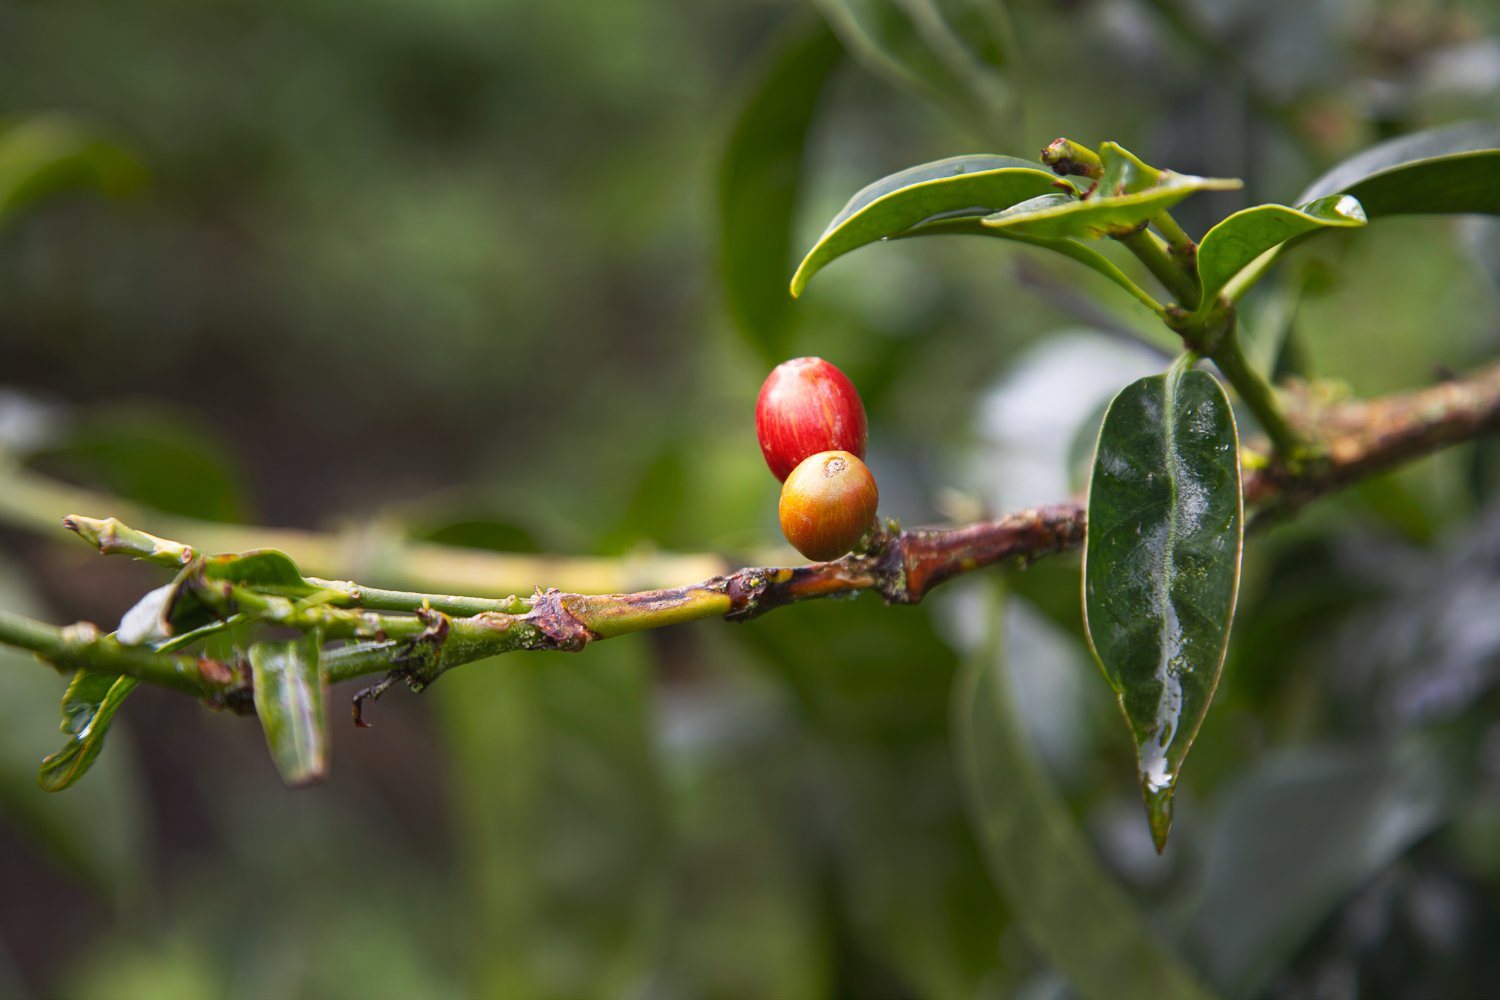 Cafe Imports sells and ships green coffee around the globe to our international offices and international warehouses.